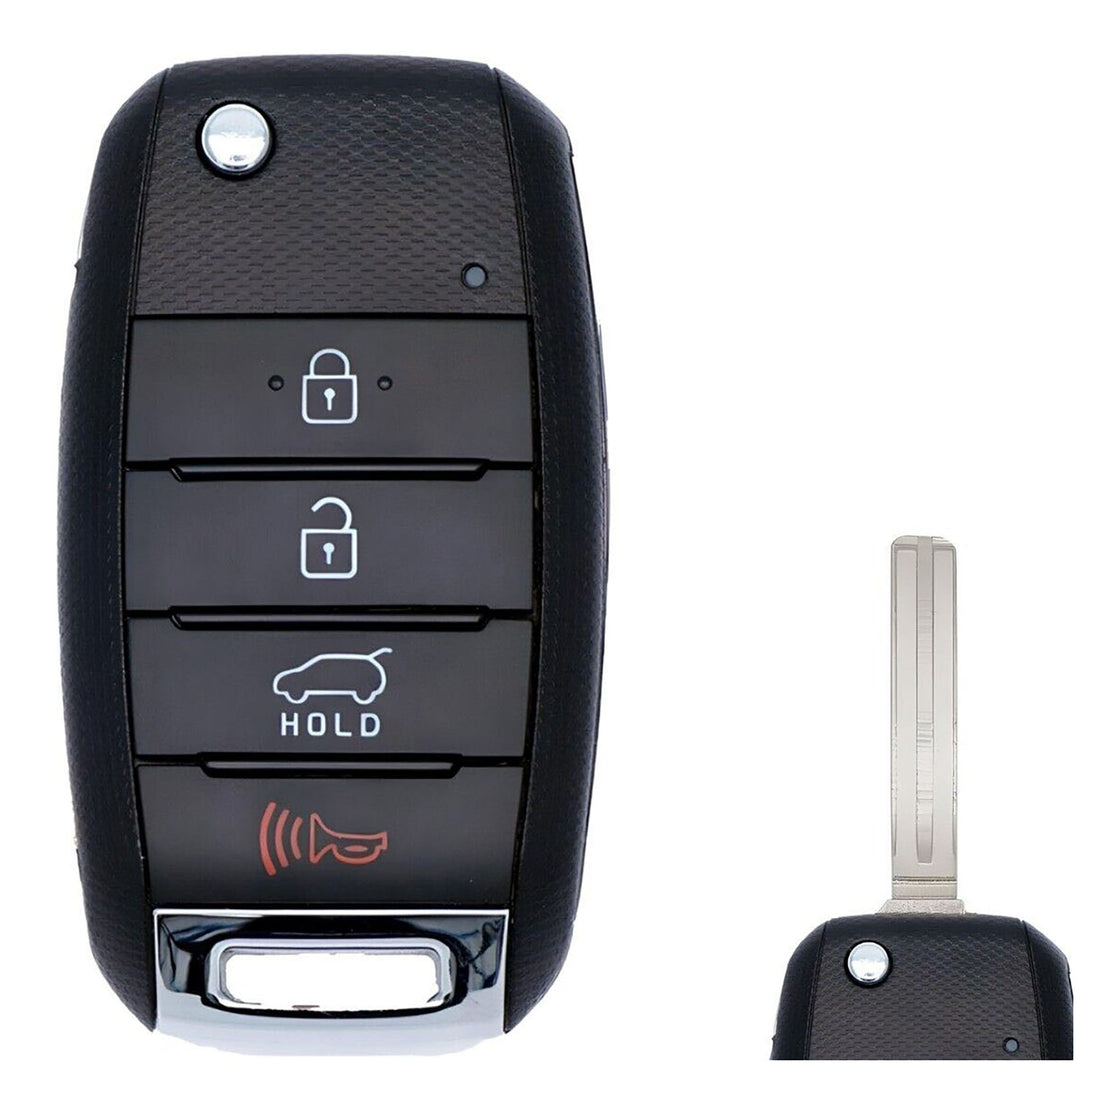 1x New Replacement Key Fob Remote Compatible with & Fit For 2014-2019 Kia Soul. Read Description. 875T - MPN OSLOKA-875T-02